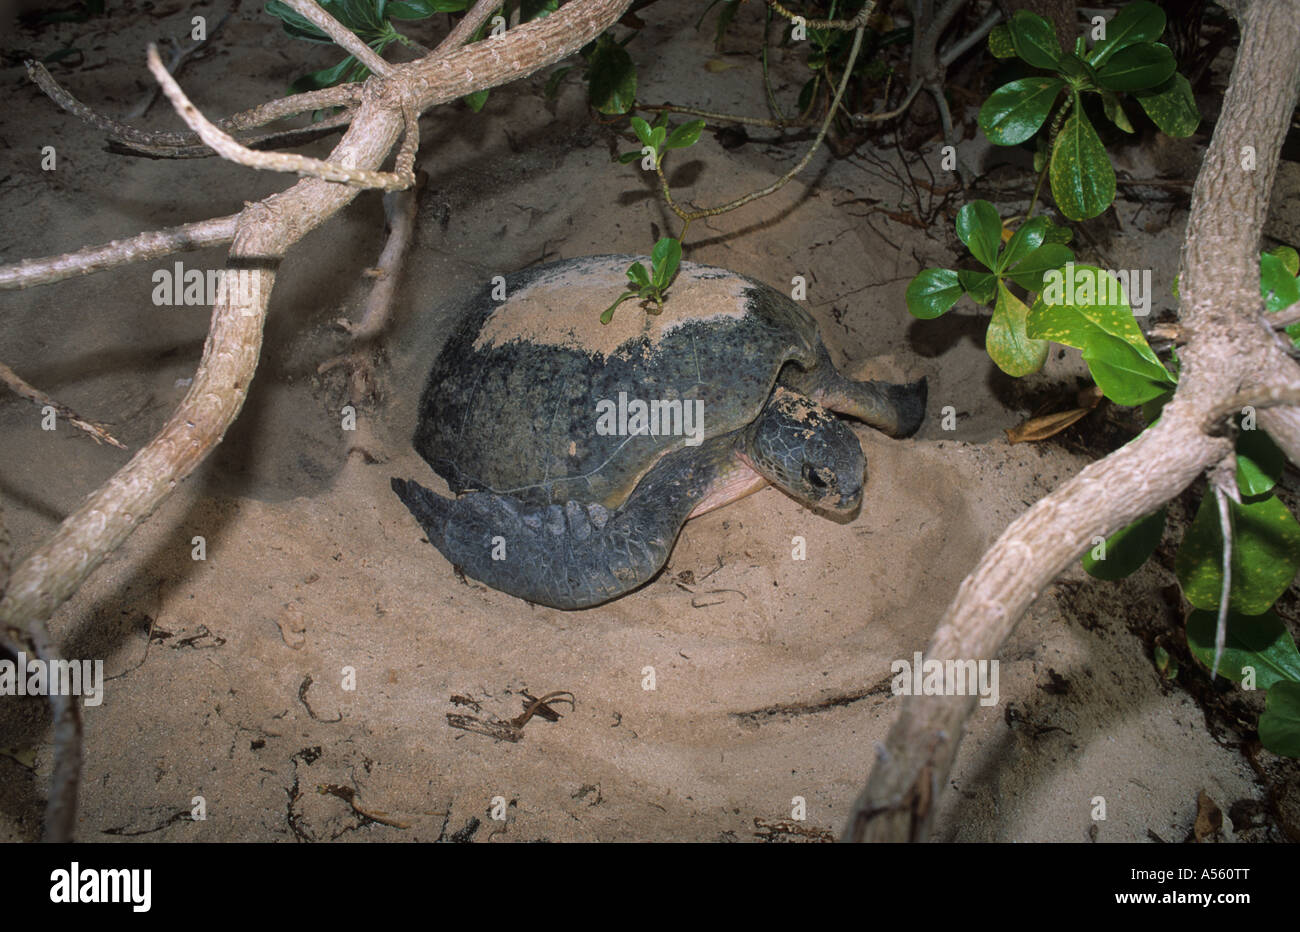 A female Green Turtle Chelonia mydas covering eggs after laying them at dawn Pulau Sangalaki Borneo Kalimantan Indonesia Stock Photo